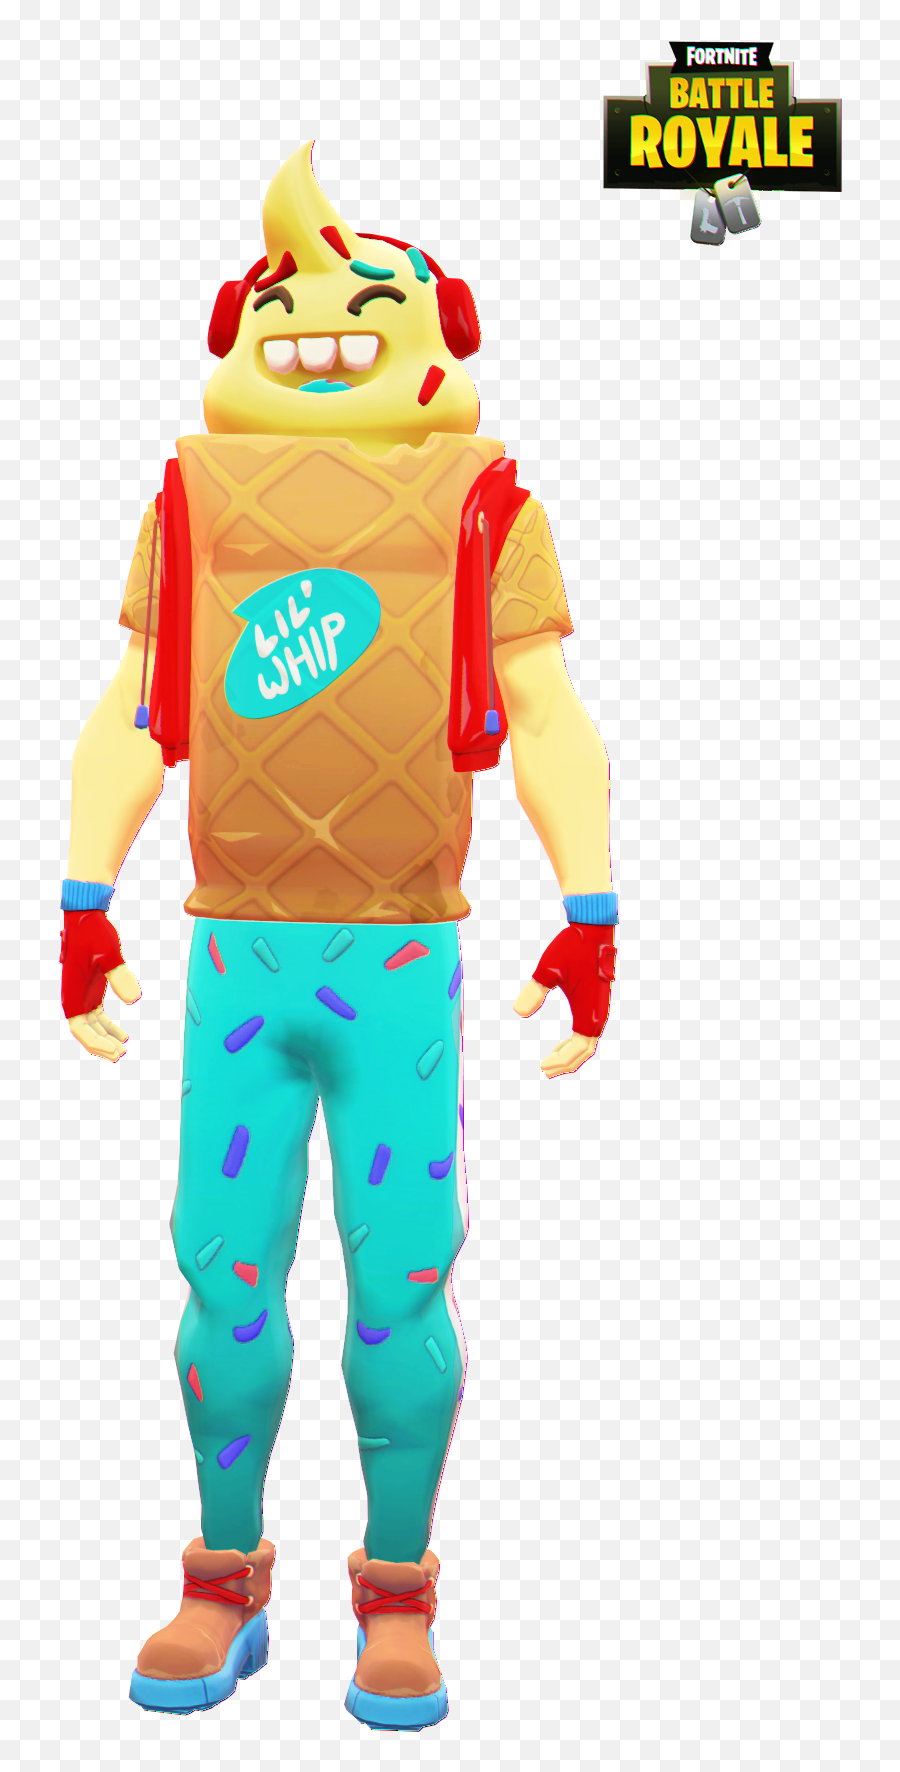 Lil Whip Fortnite Posted By Ryan Peltier - Draw Fortnite Lil Whip Emoji,Tomatohead Emoticon In Durr Burger